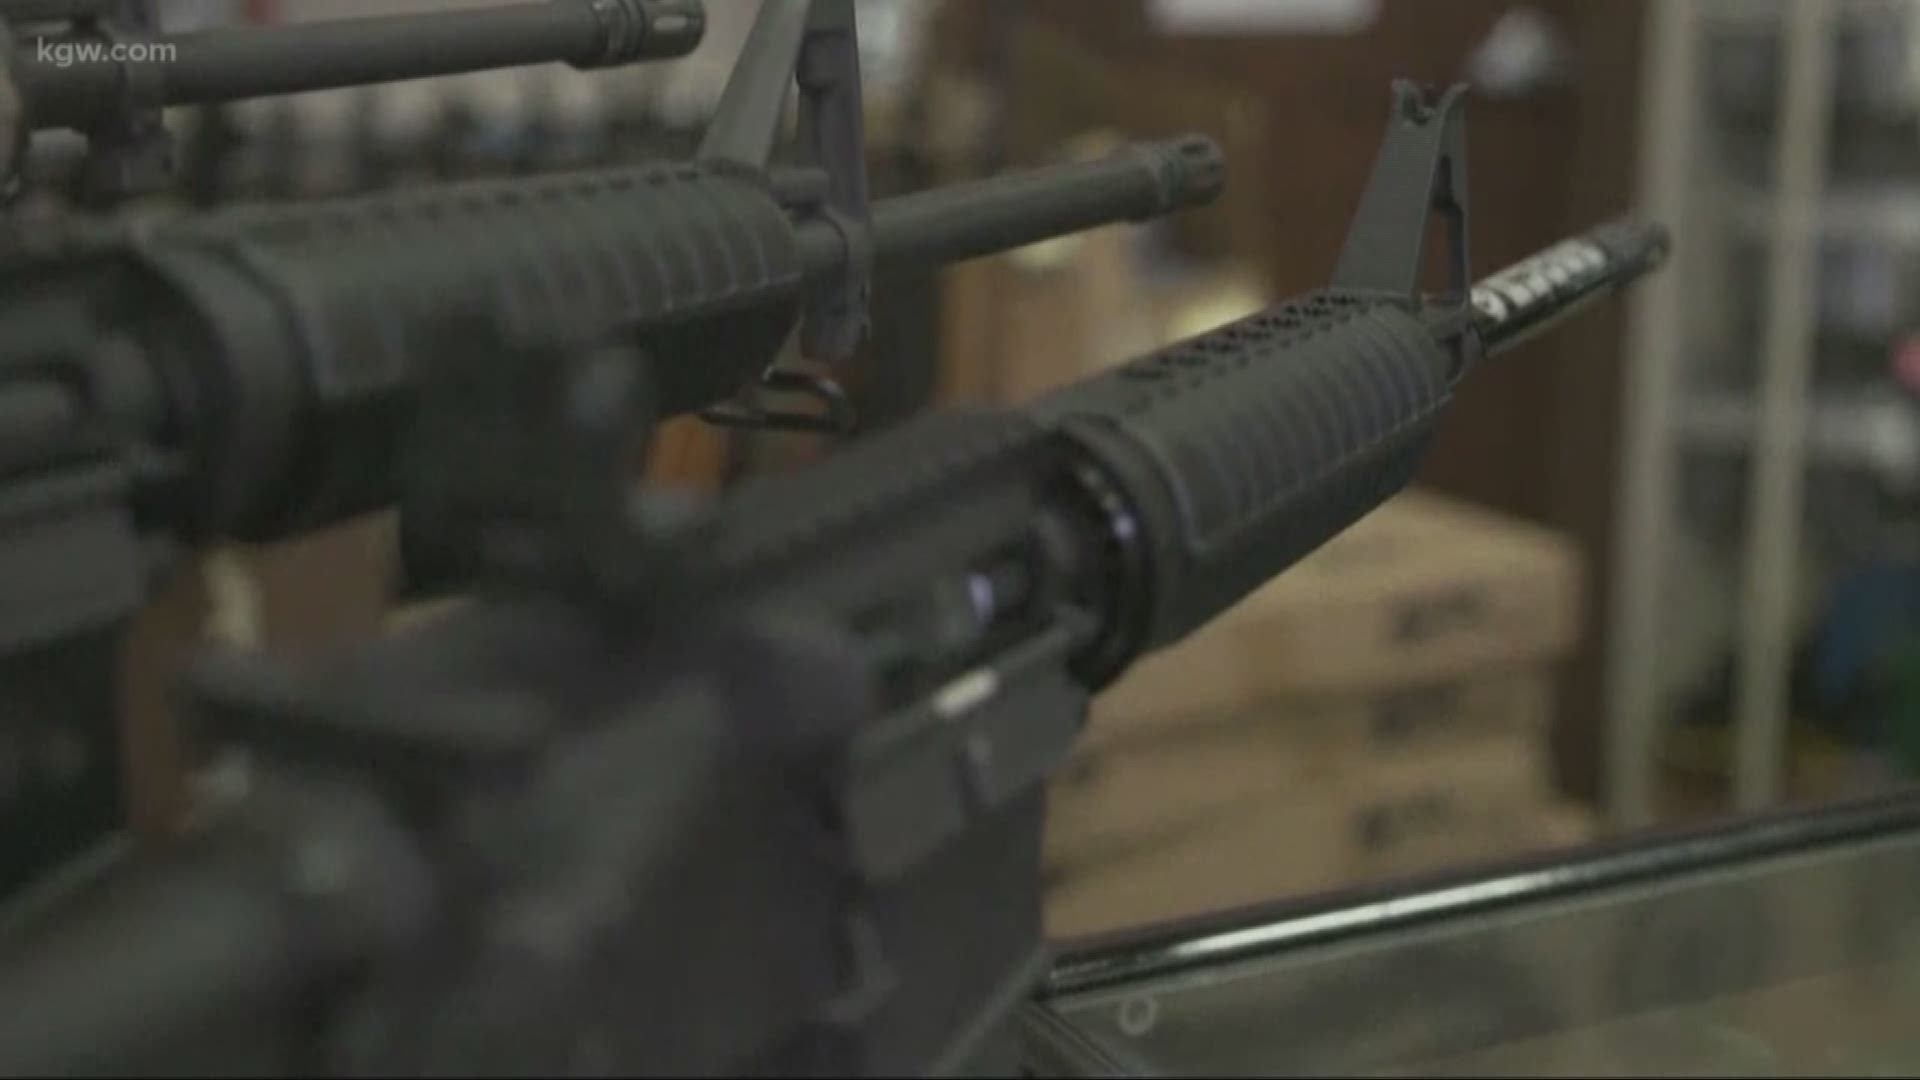 The proposal would require owners to surrender certain guns.